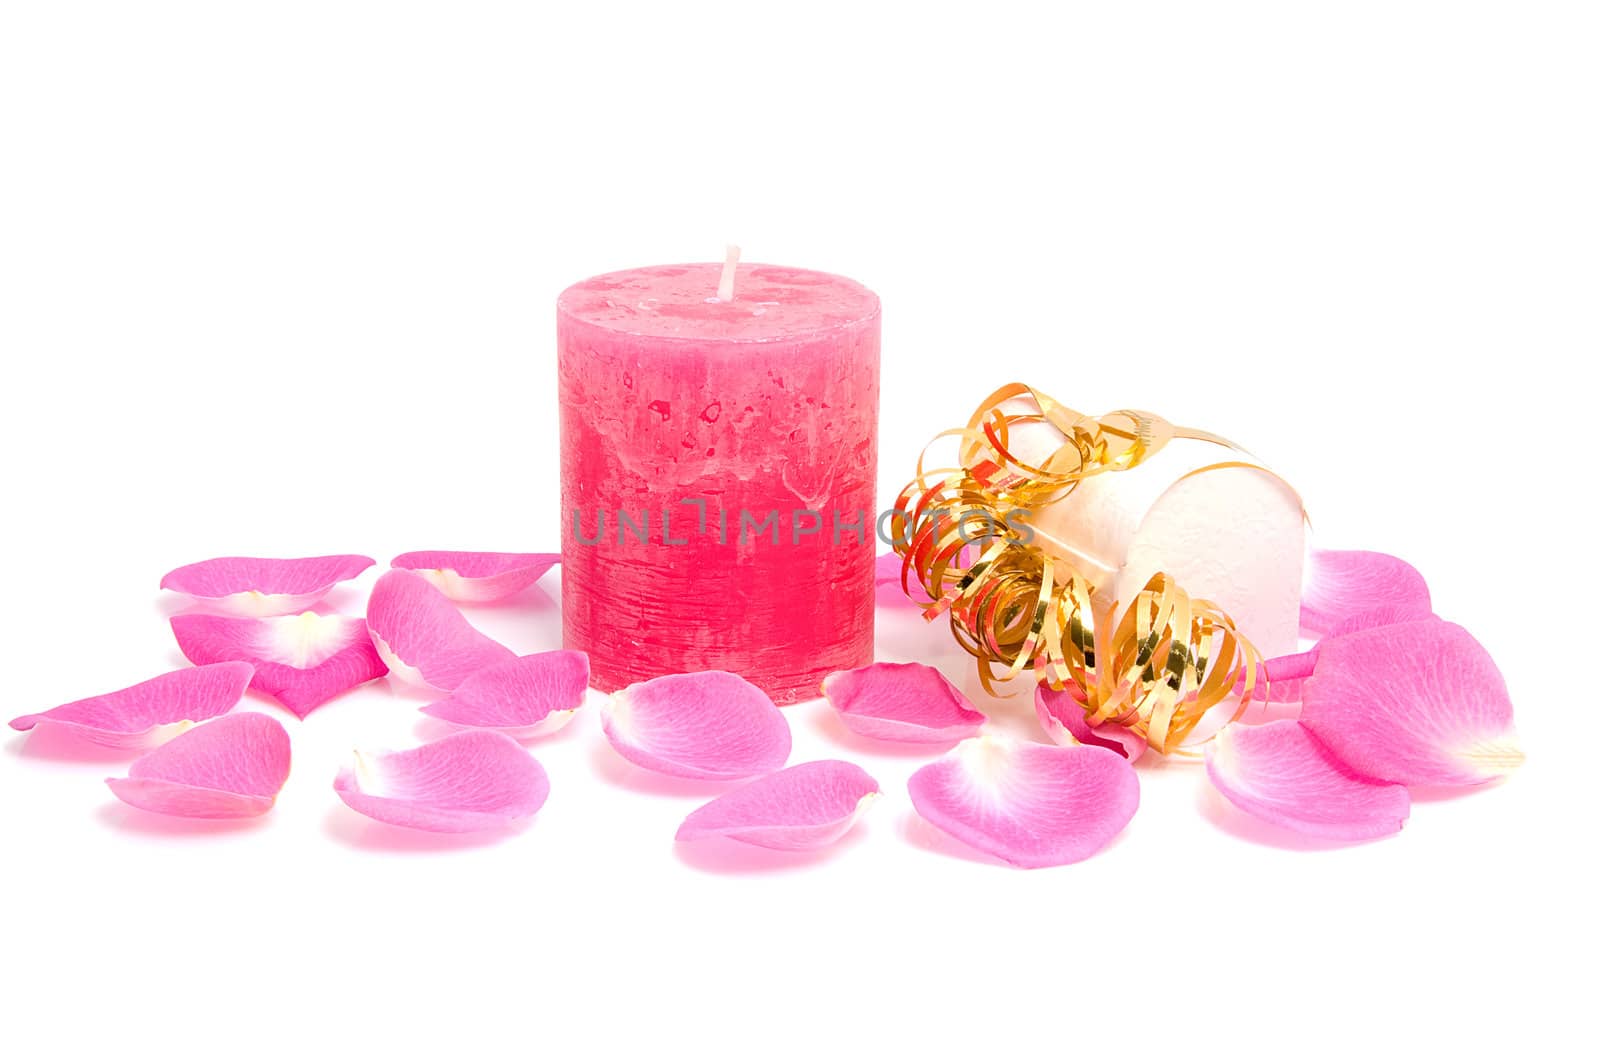 Pink candle with rose leaves and box of chocolate for Valentine's day over white background